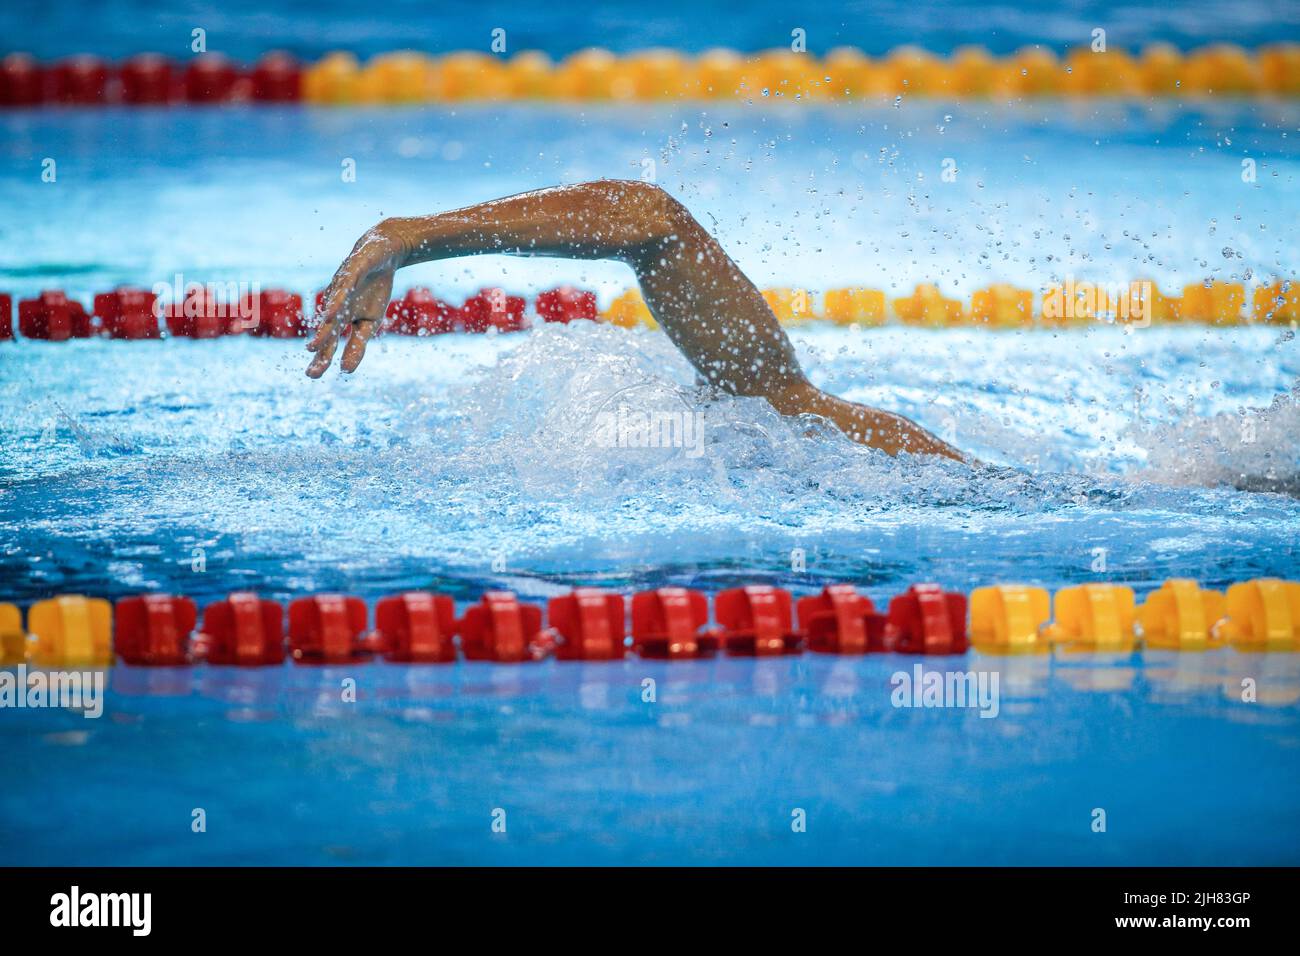 Details with a professional male athlete swimming in an olympic swimming pool freestyle. Stock Photo